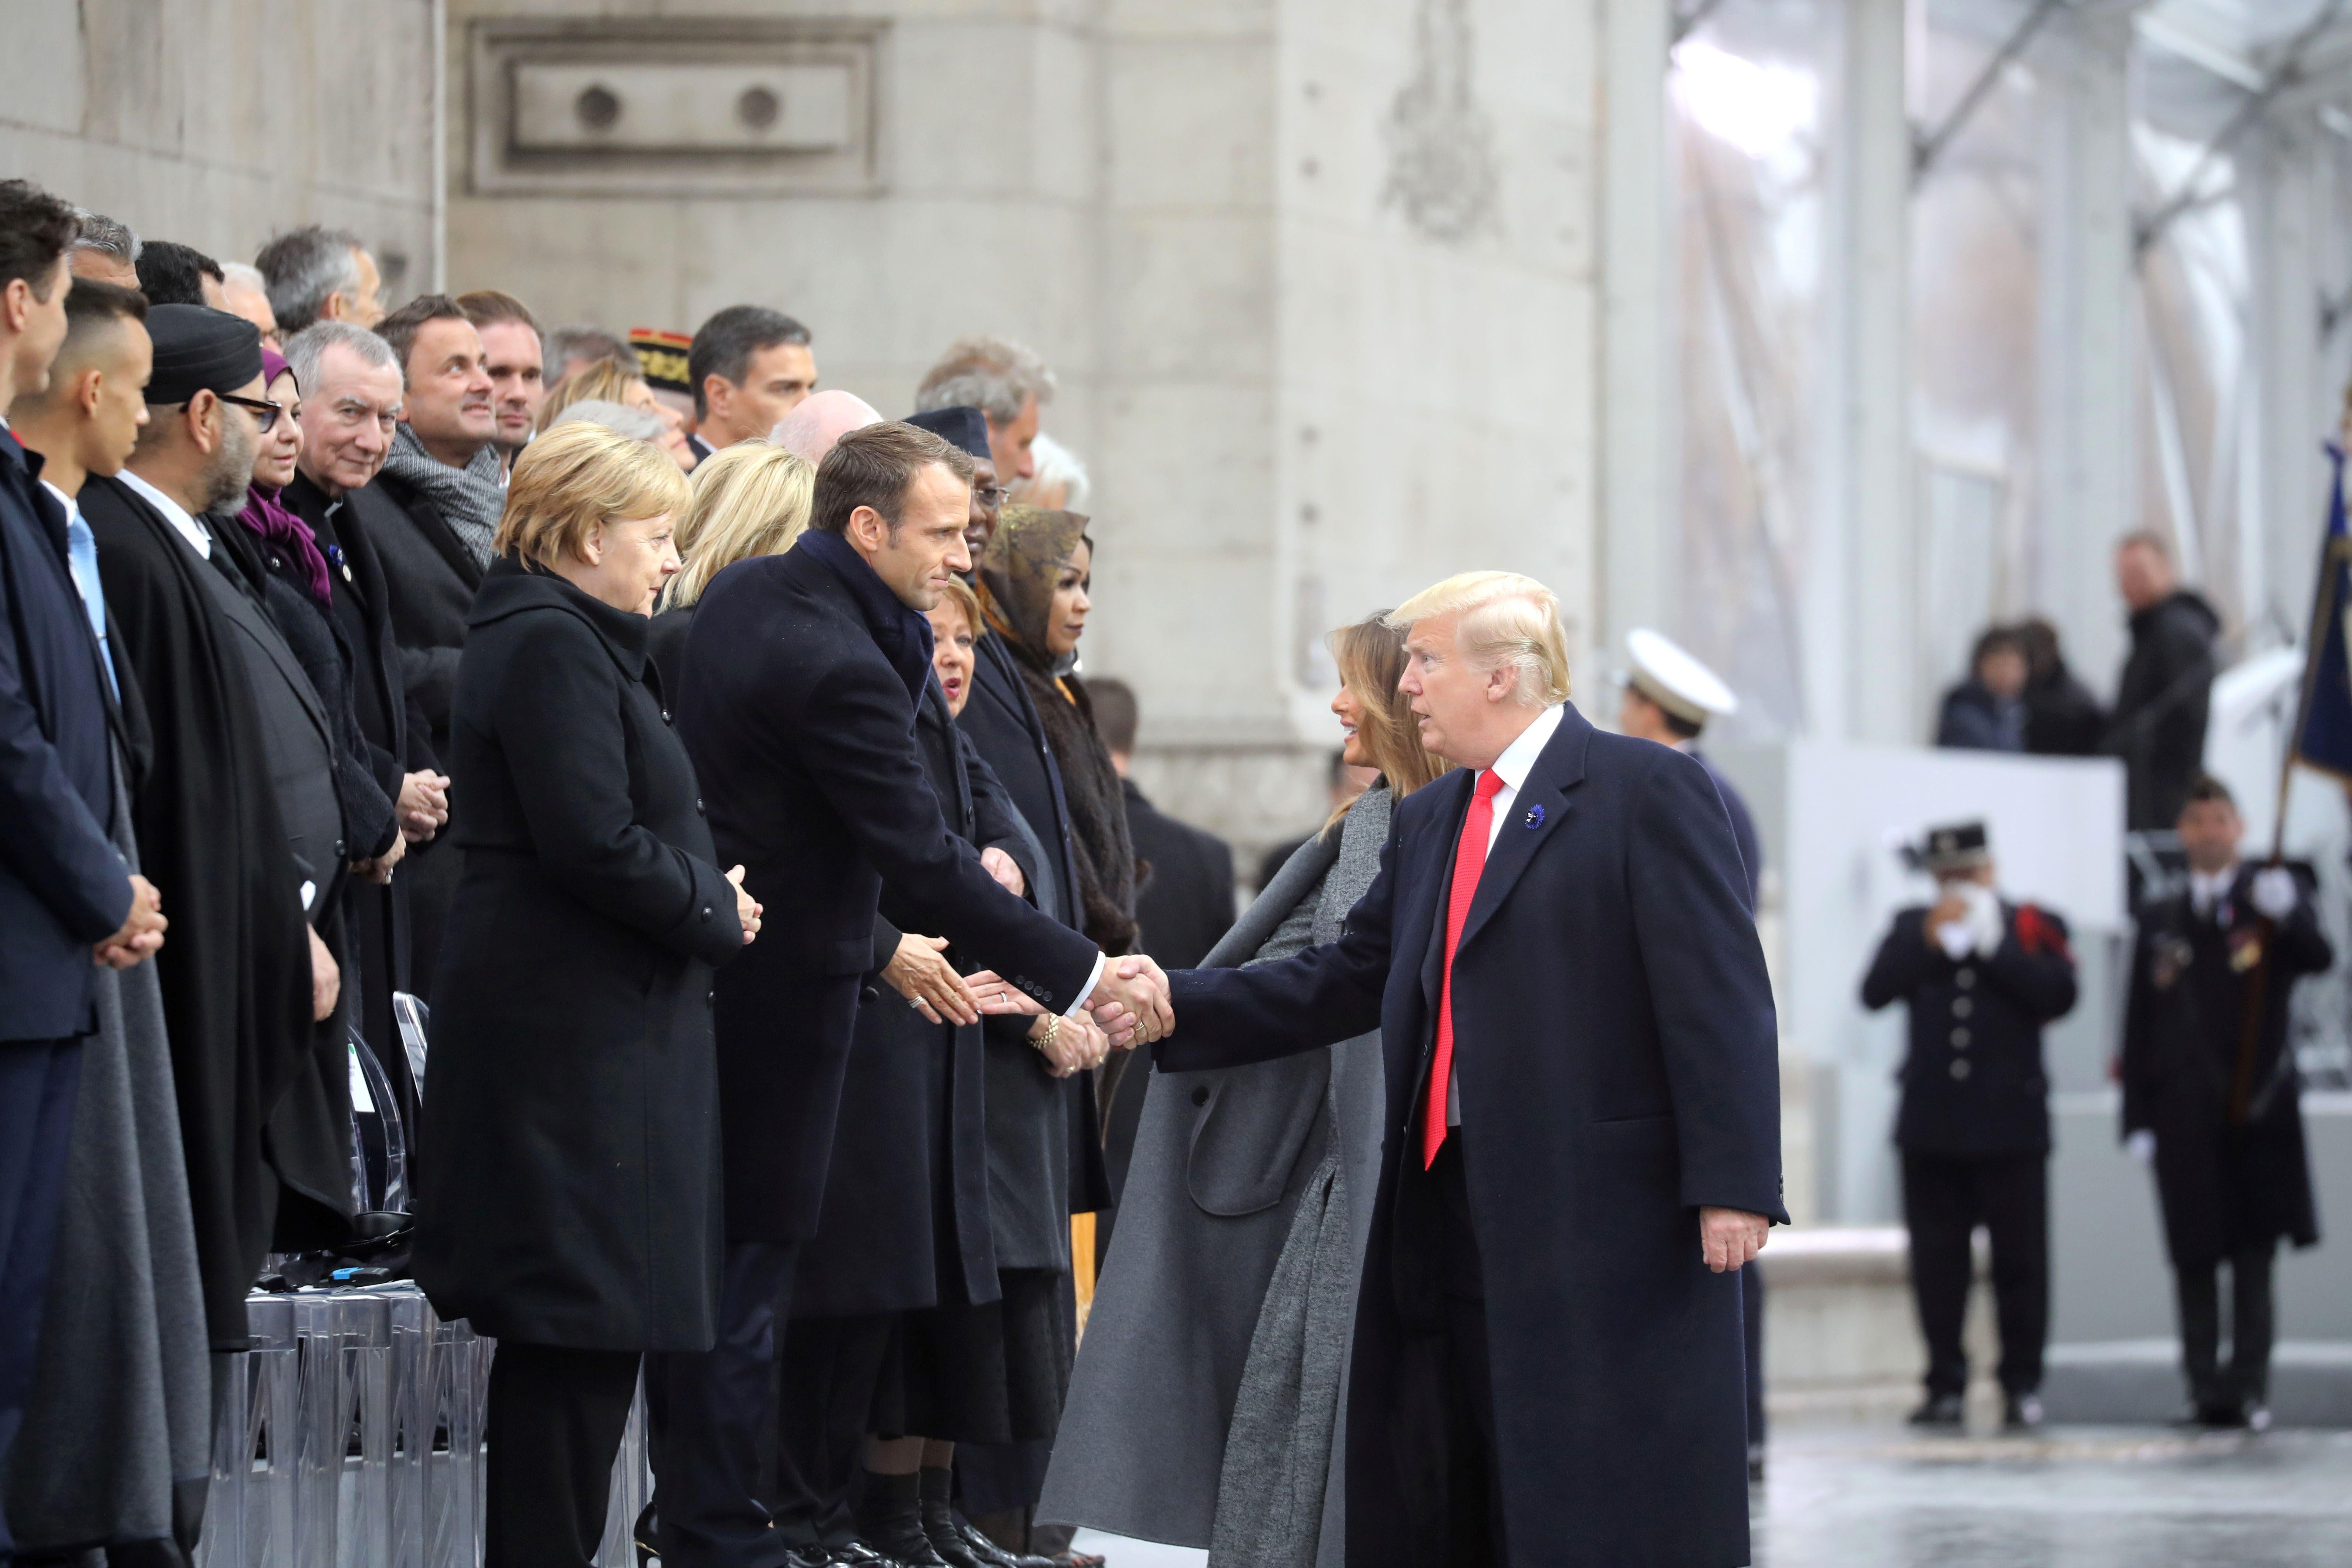 US president Donald Trump shakes hands with French president Emmanuel Macron as he arrives at the Arc de Triomphe in Paris on November 11, 2018 to attend a ceremony as part of commemorations marking the 100th anniversary of the 1918 armistice.